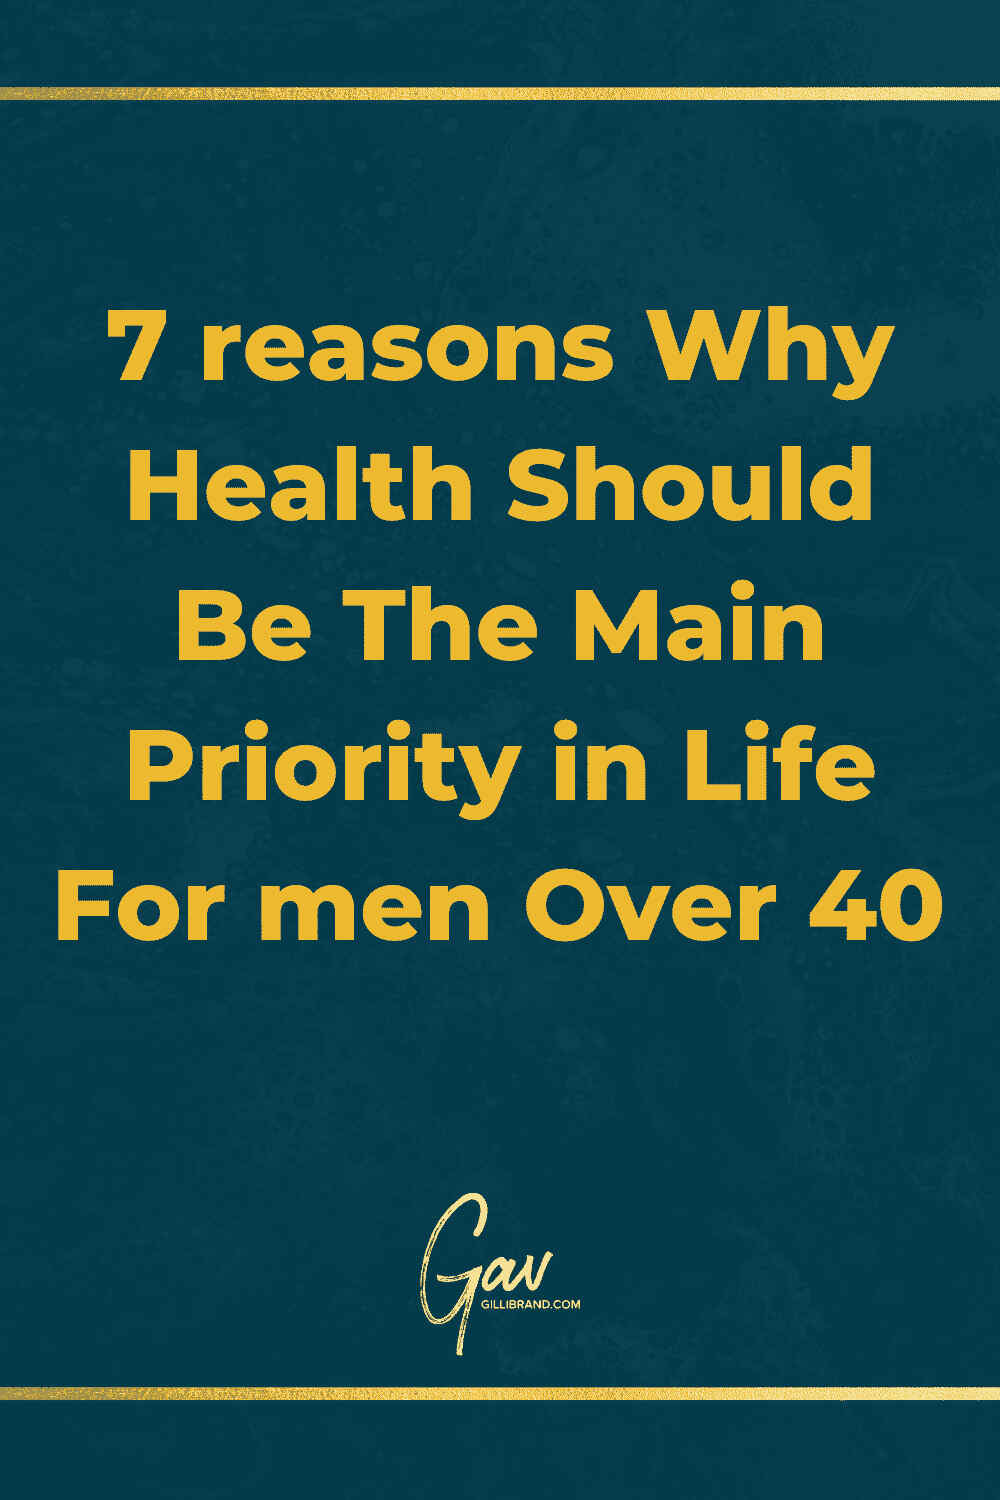 Featured image for “7 reasons Why Health Should Be The Main Priority in Life For men Over 40”